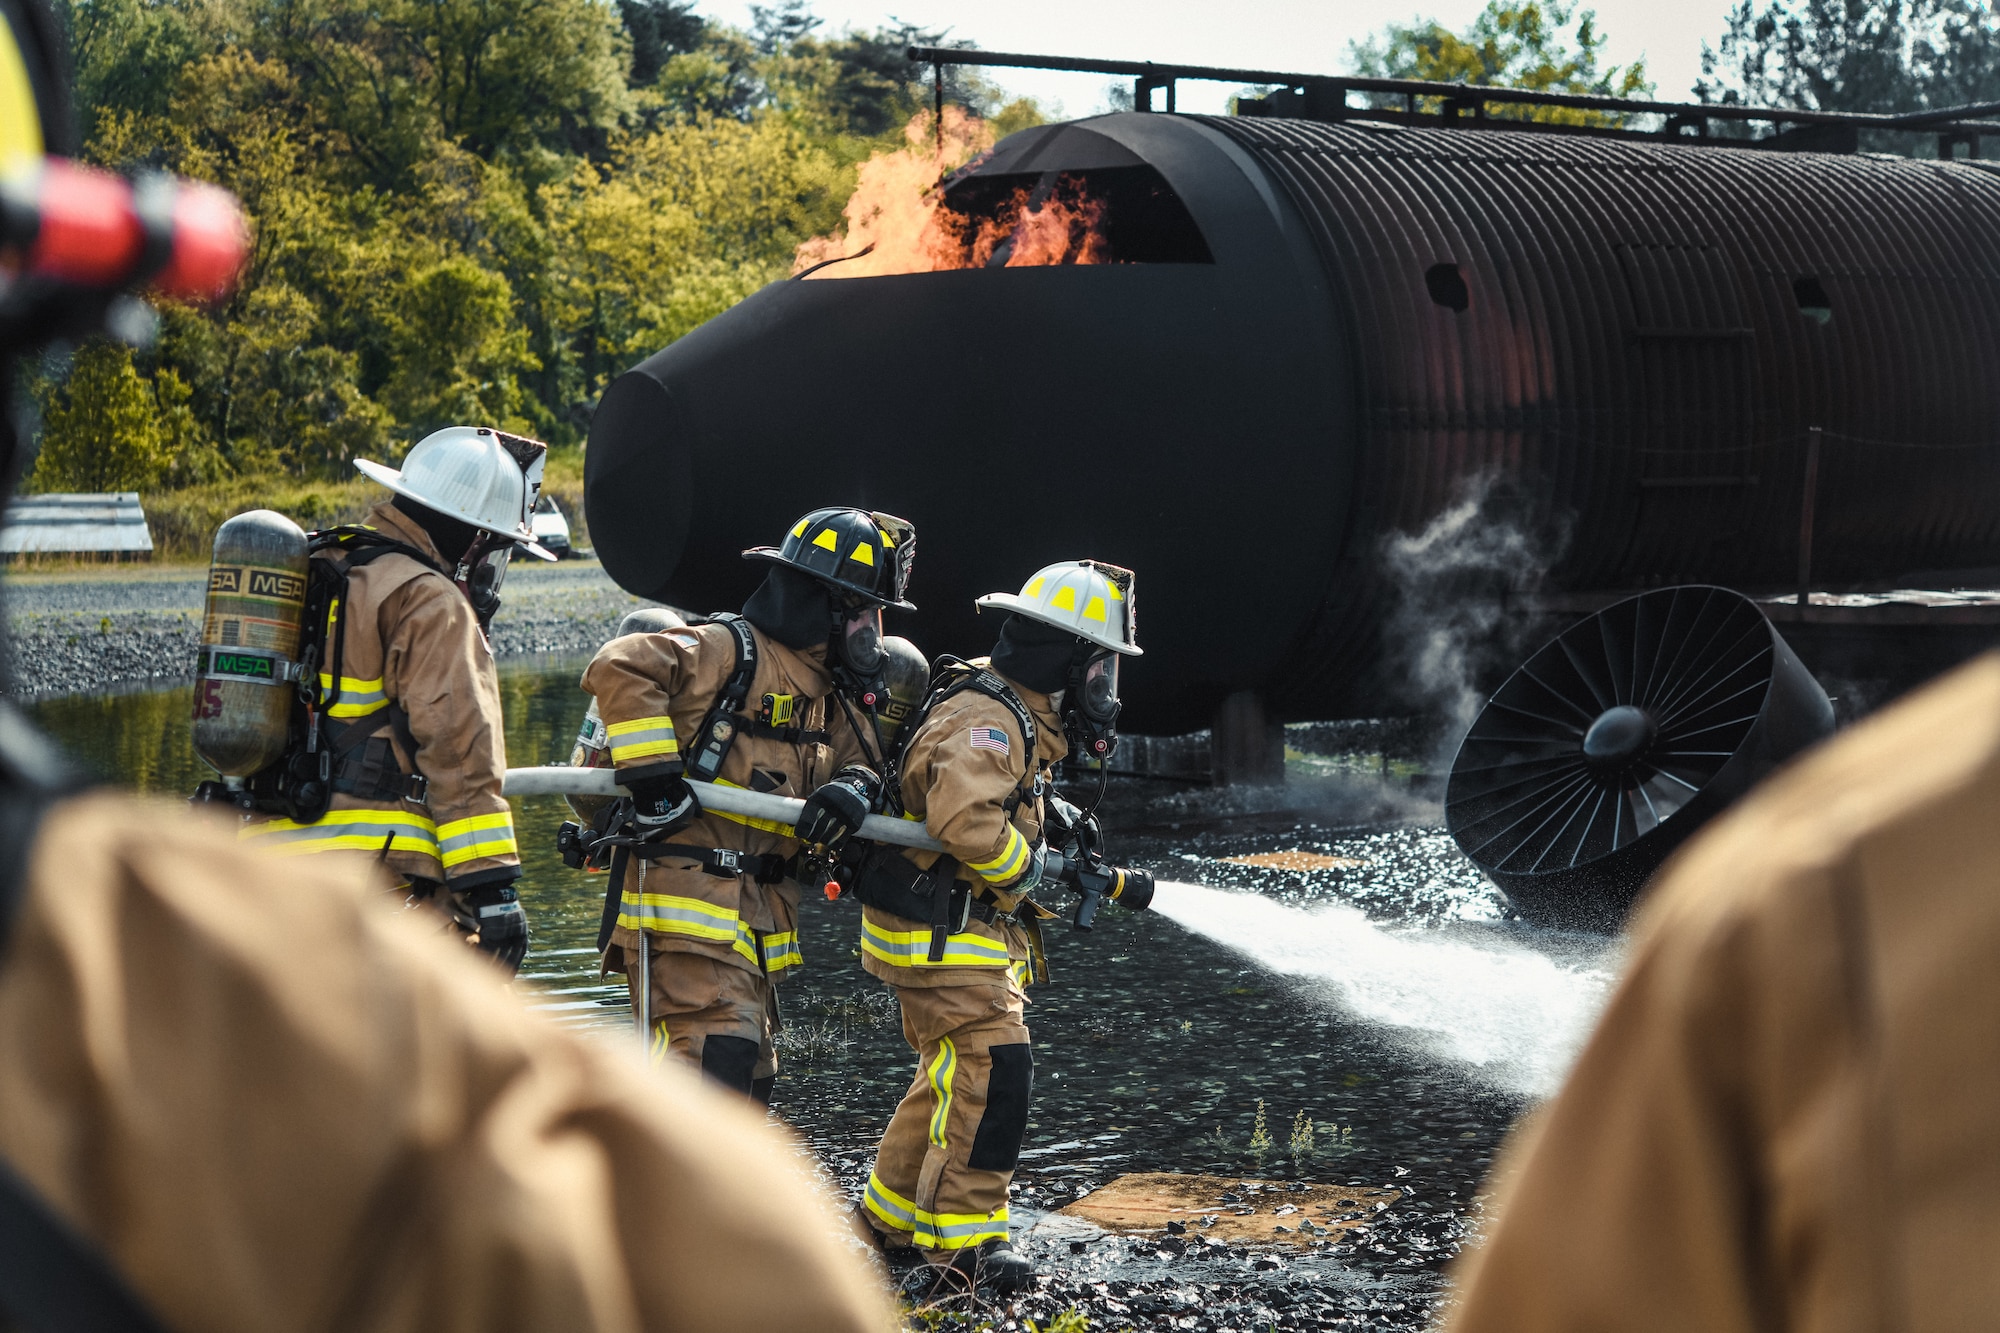 Three 316th Civil Engineer Squadron firefighters pull a gushing fire hose toward a simulated aircraft fire during an interagency fire-fight training at Joint Base Andrews, Md., May 2, 2022.